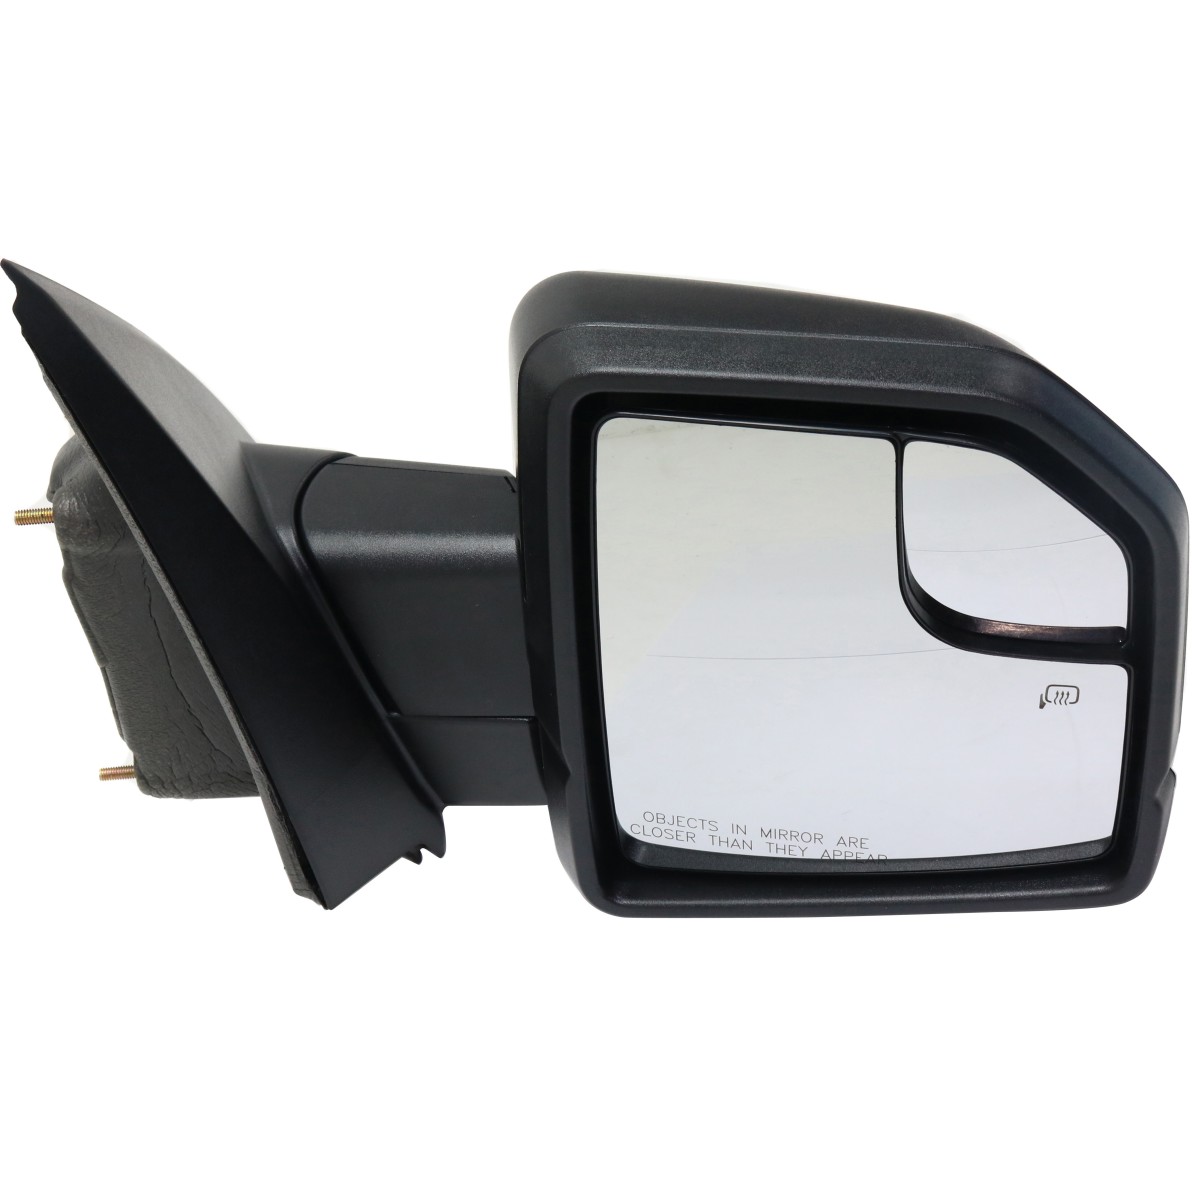 Set of 2 Mirrors LeftandRight Heated for F150 Truck LH & RH Ford F